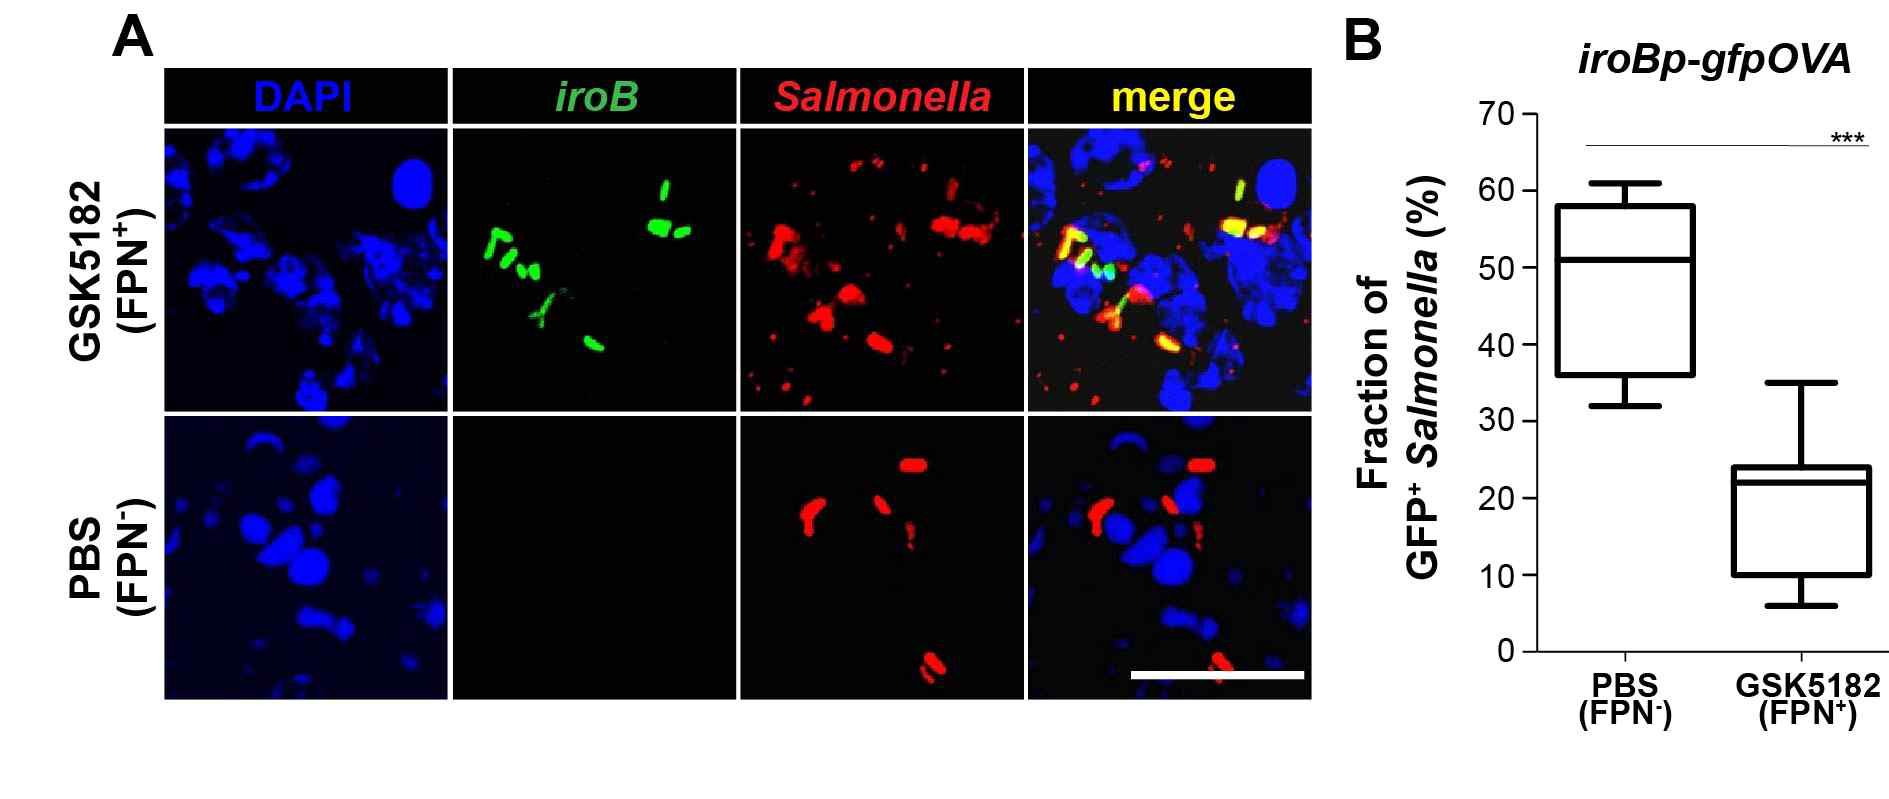 (A)Expression of iroB-gfpOVA in the Salmonella infecting BL/6 mice treated with GSK5182 (FPN+) or PBS (FPN-). Representative image of spleens infected with Salmonella was examined by confocal microscopy 2.5 days after the infection (1 x 105 CFU) through i.v. route and (B) quantification